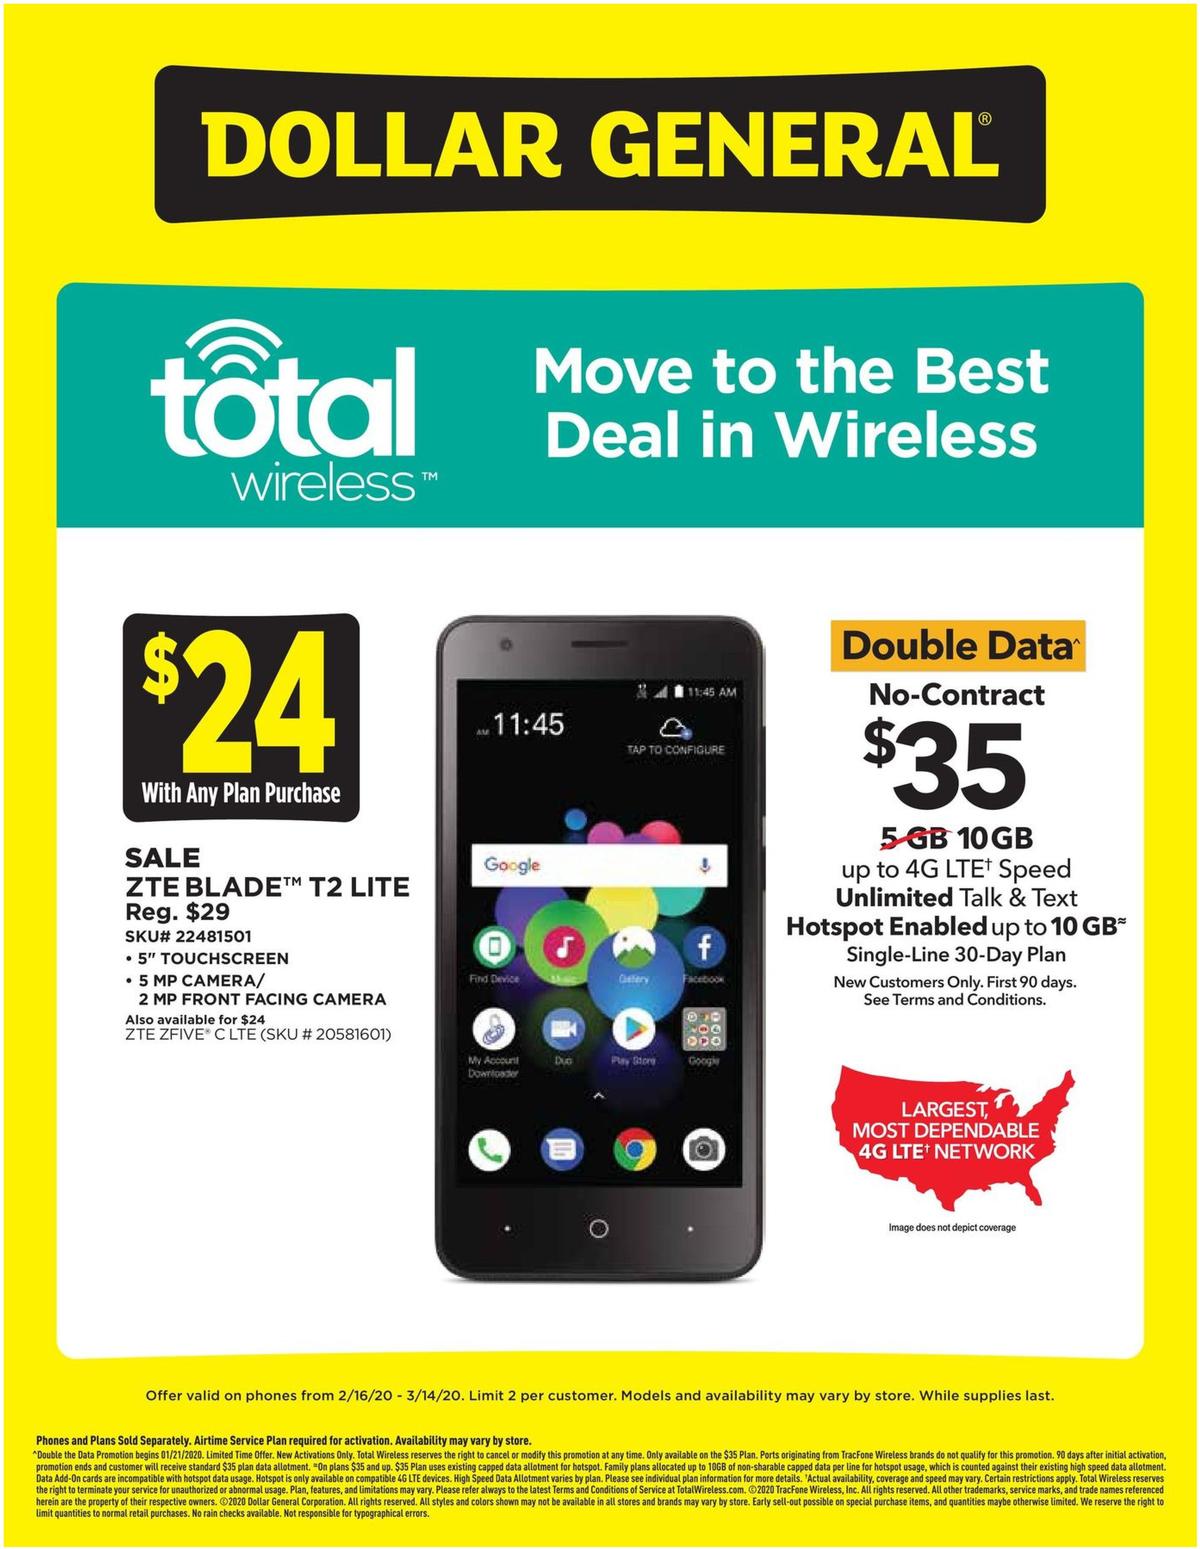 Dollar General Weekly Wireless Specials Weekly Ad from February 16